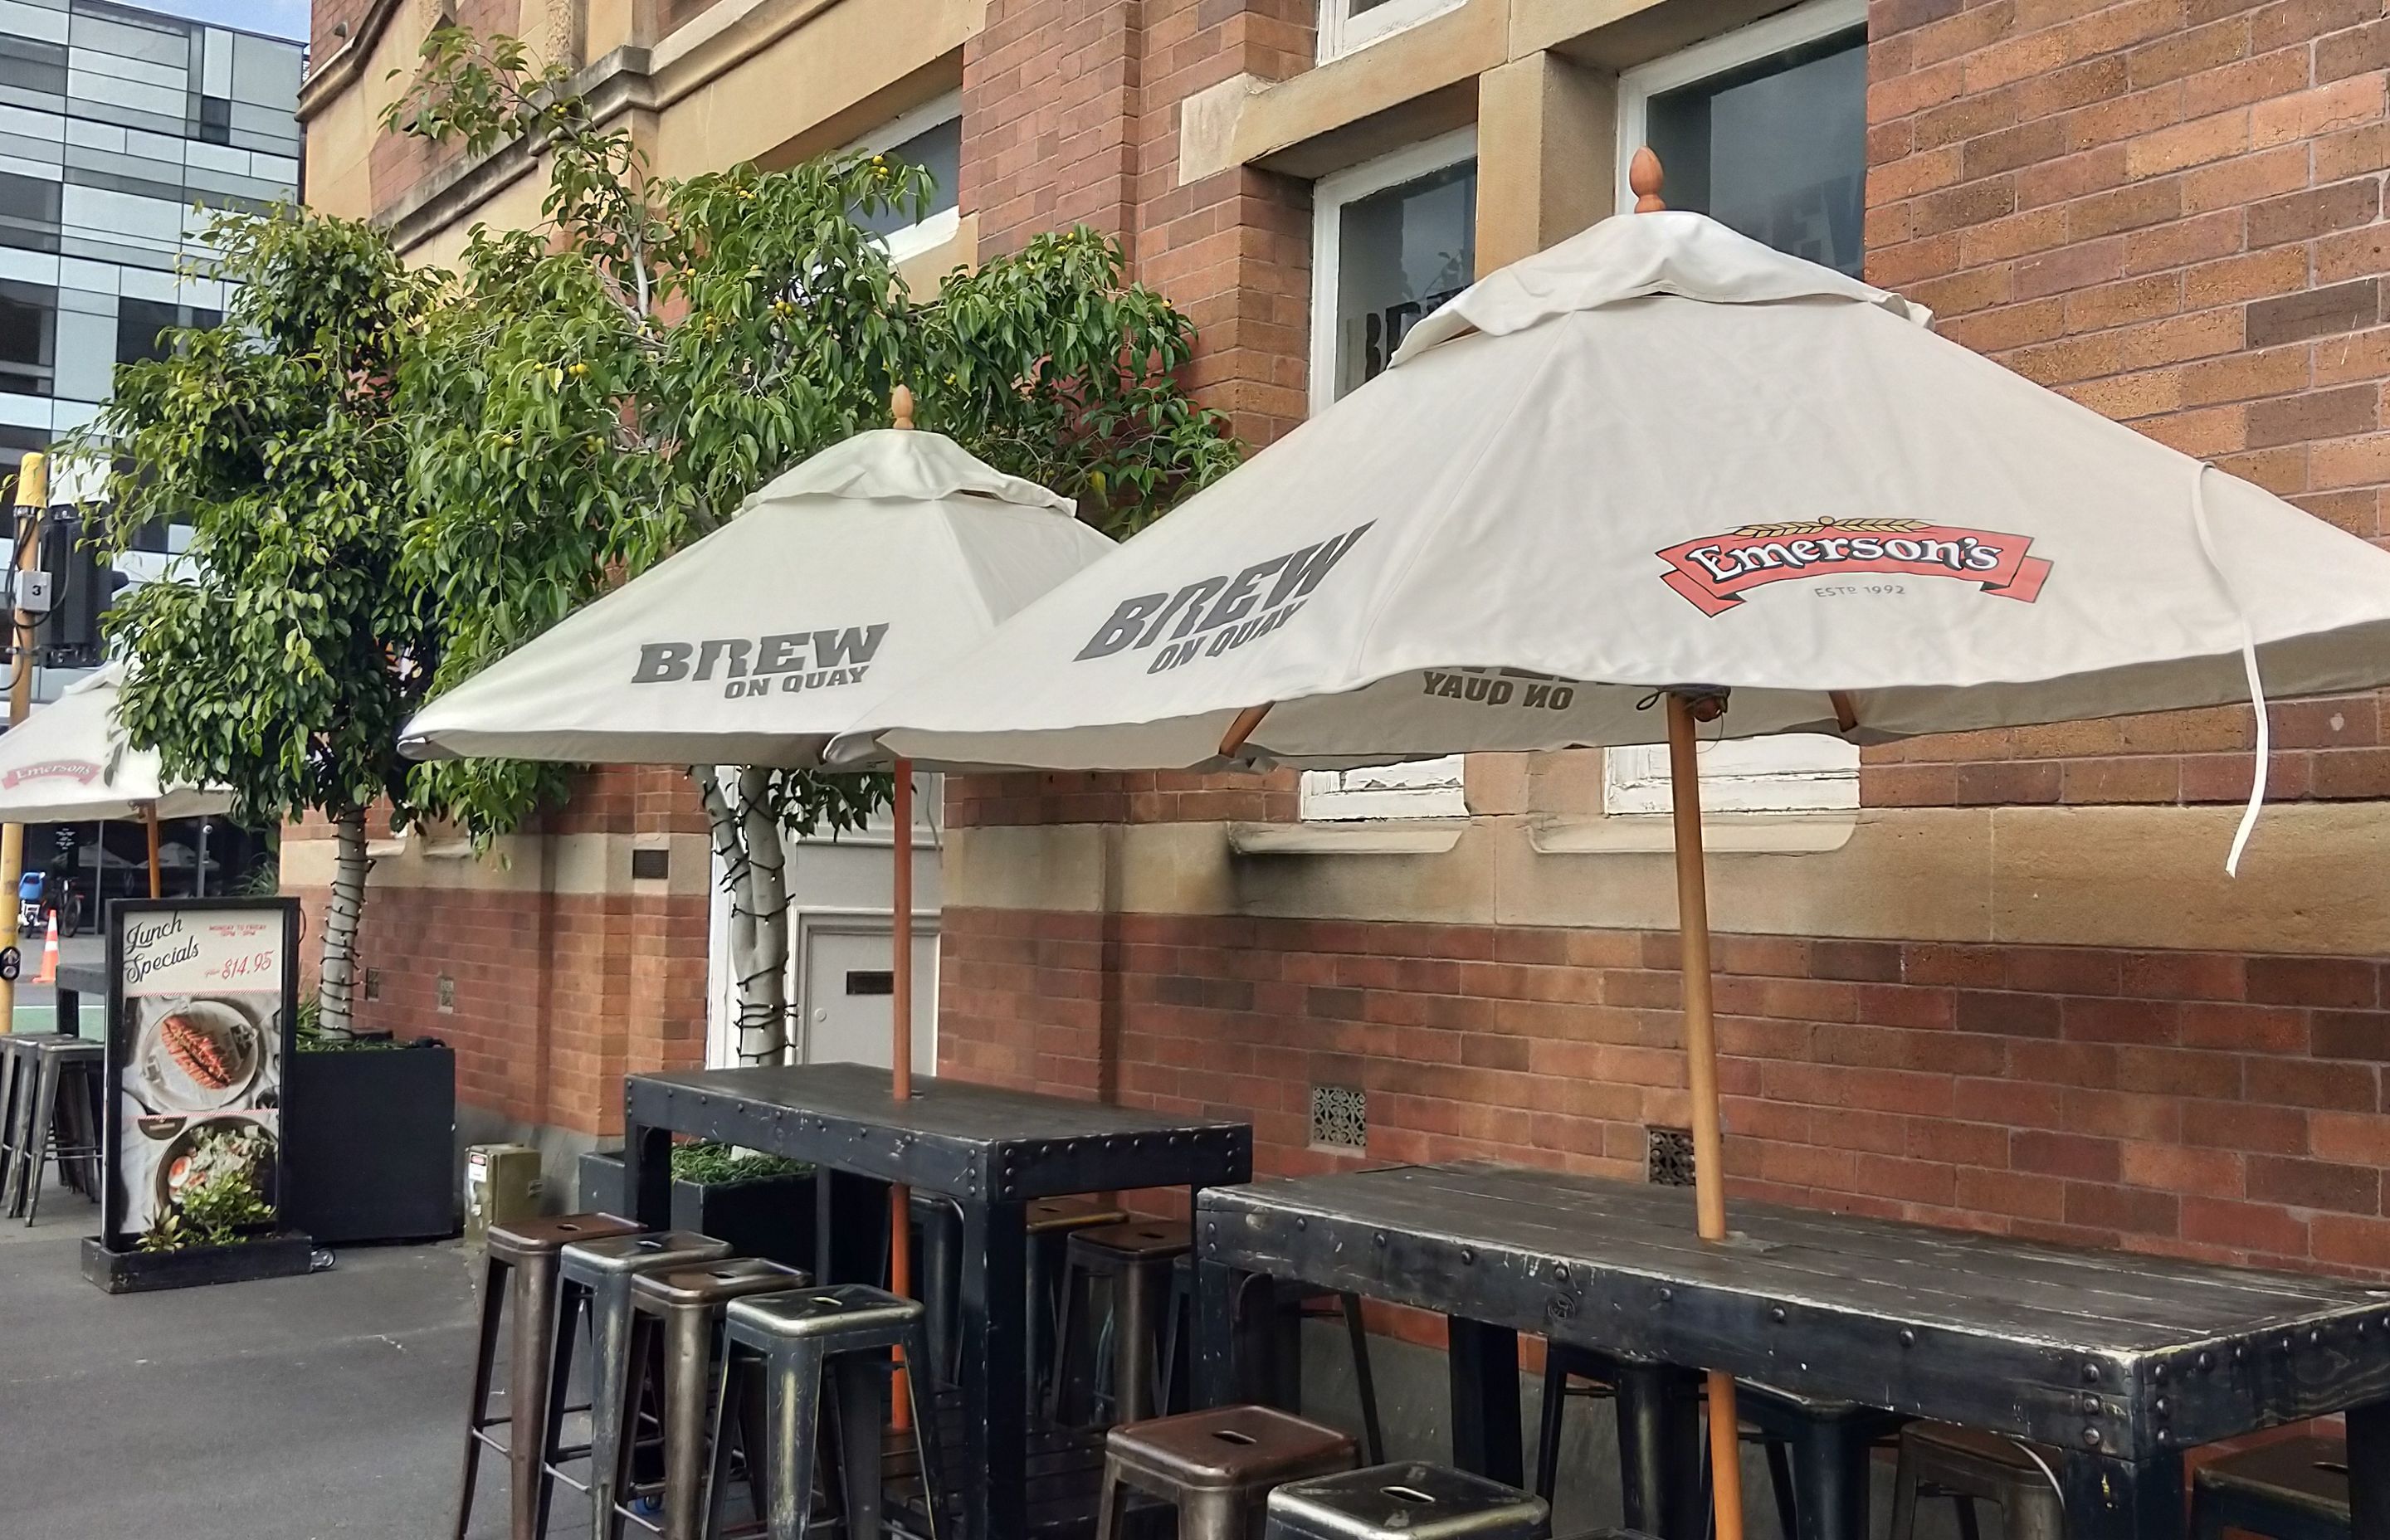 What to know about branded shade umbrellas for your next event